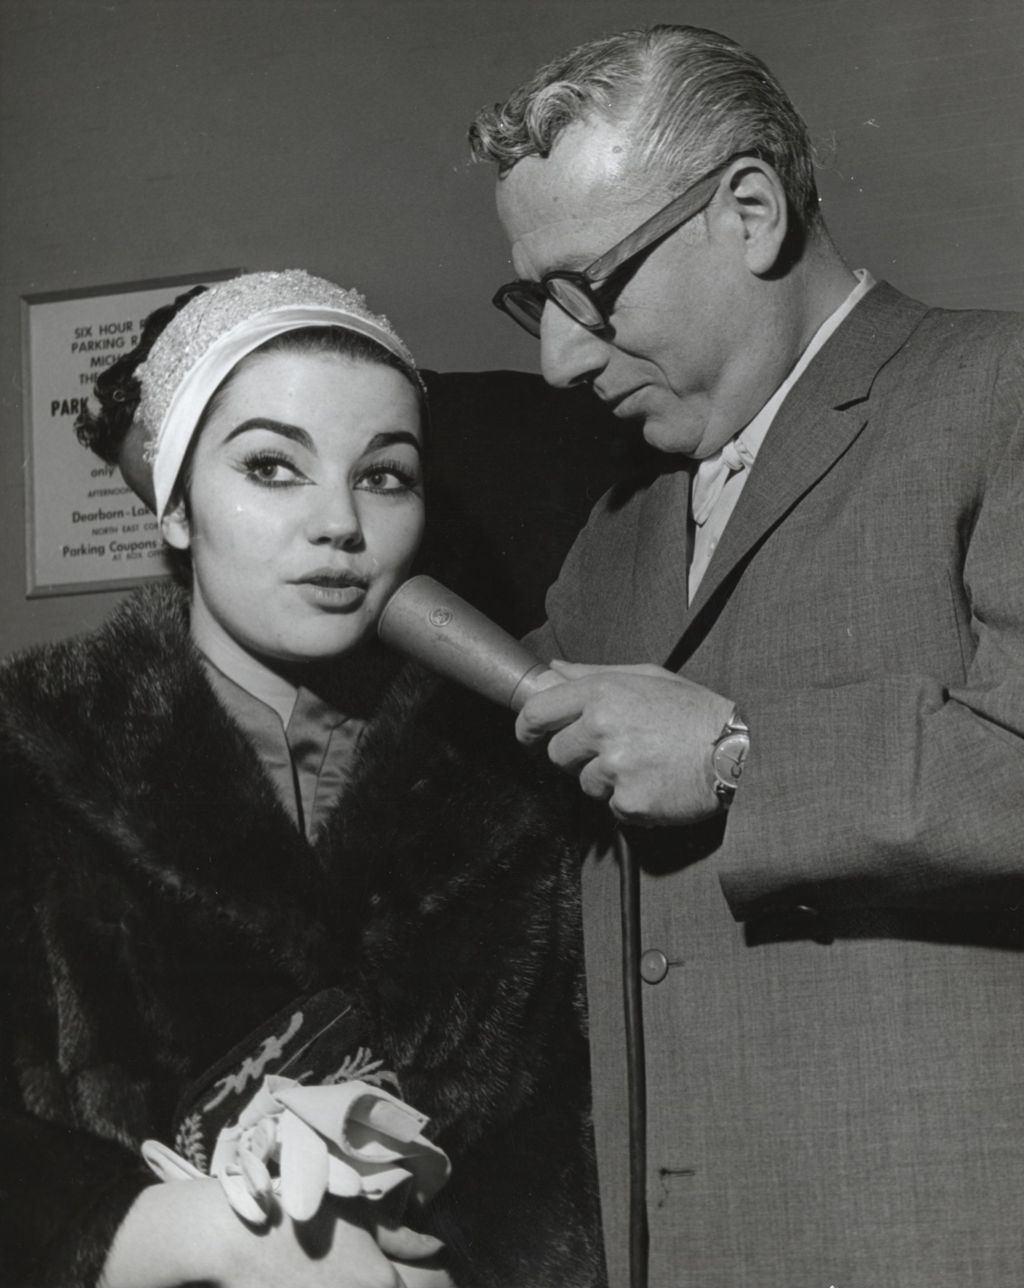 Radio host Jack Eigen interviewing actress Brigit Bazlen at the Chicago premiere of the film West Side Story at the Michael Todd Theatre. The premiere was a benefit for Hull-House